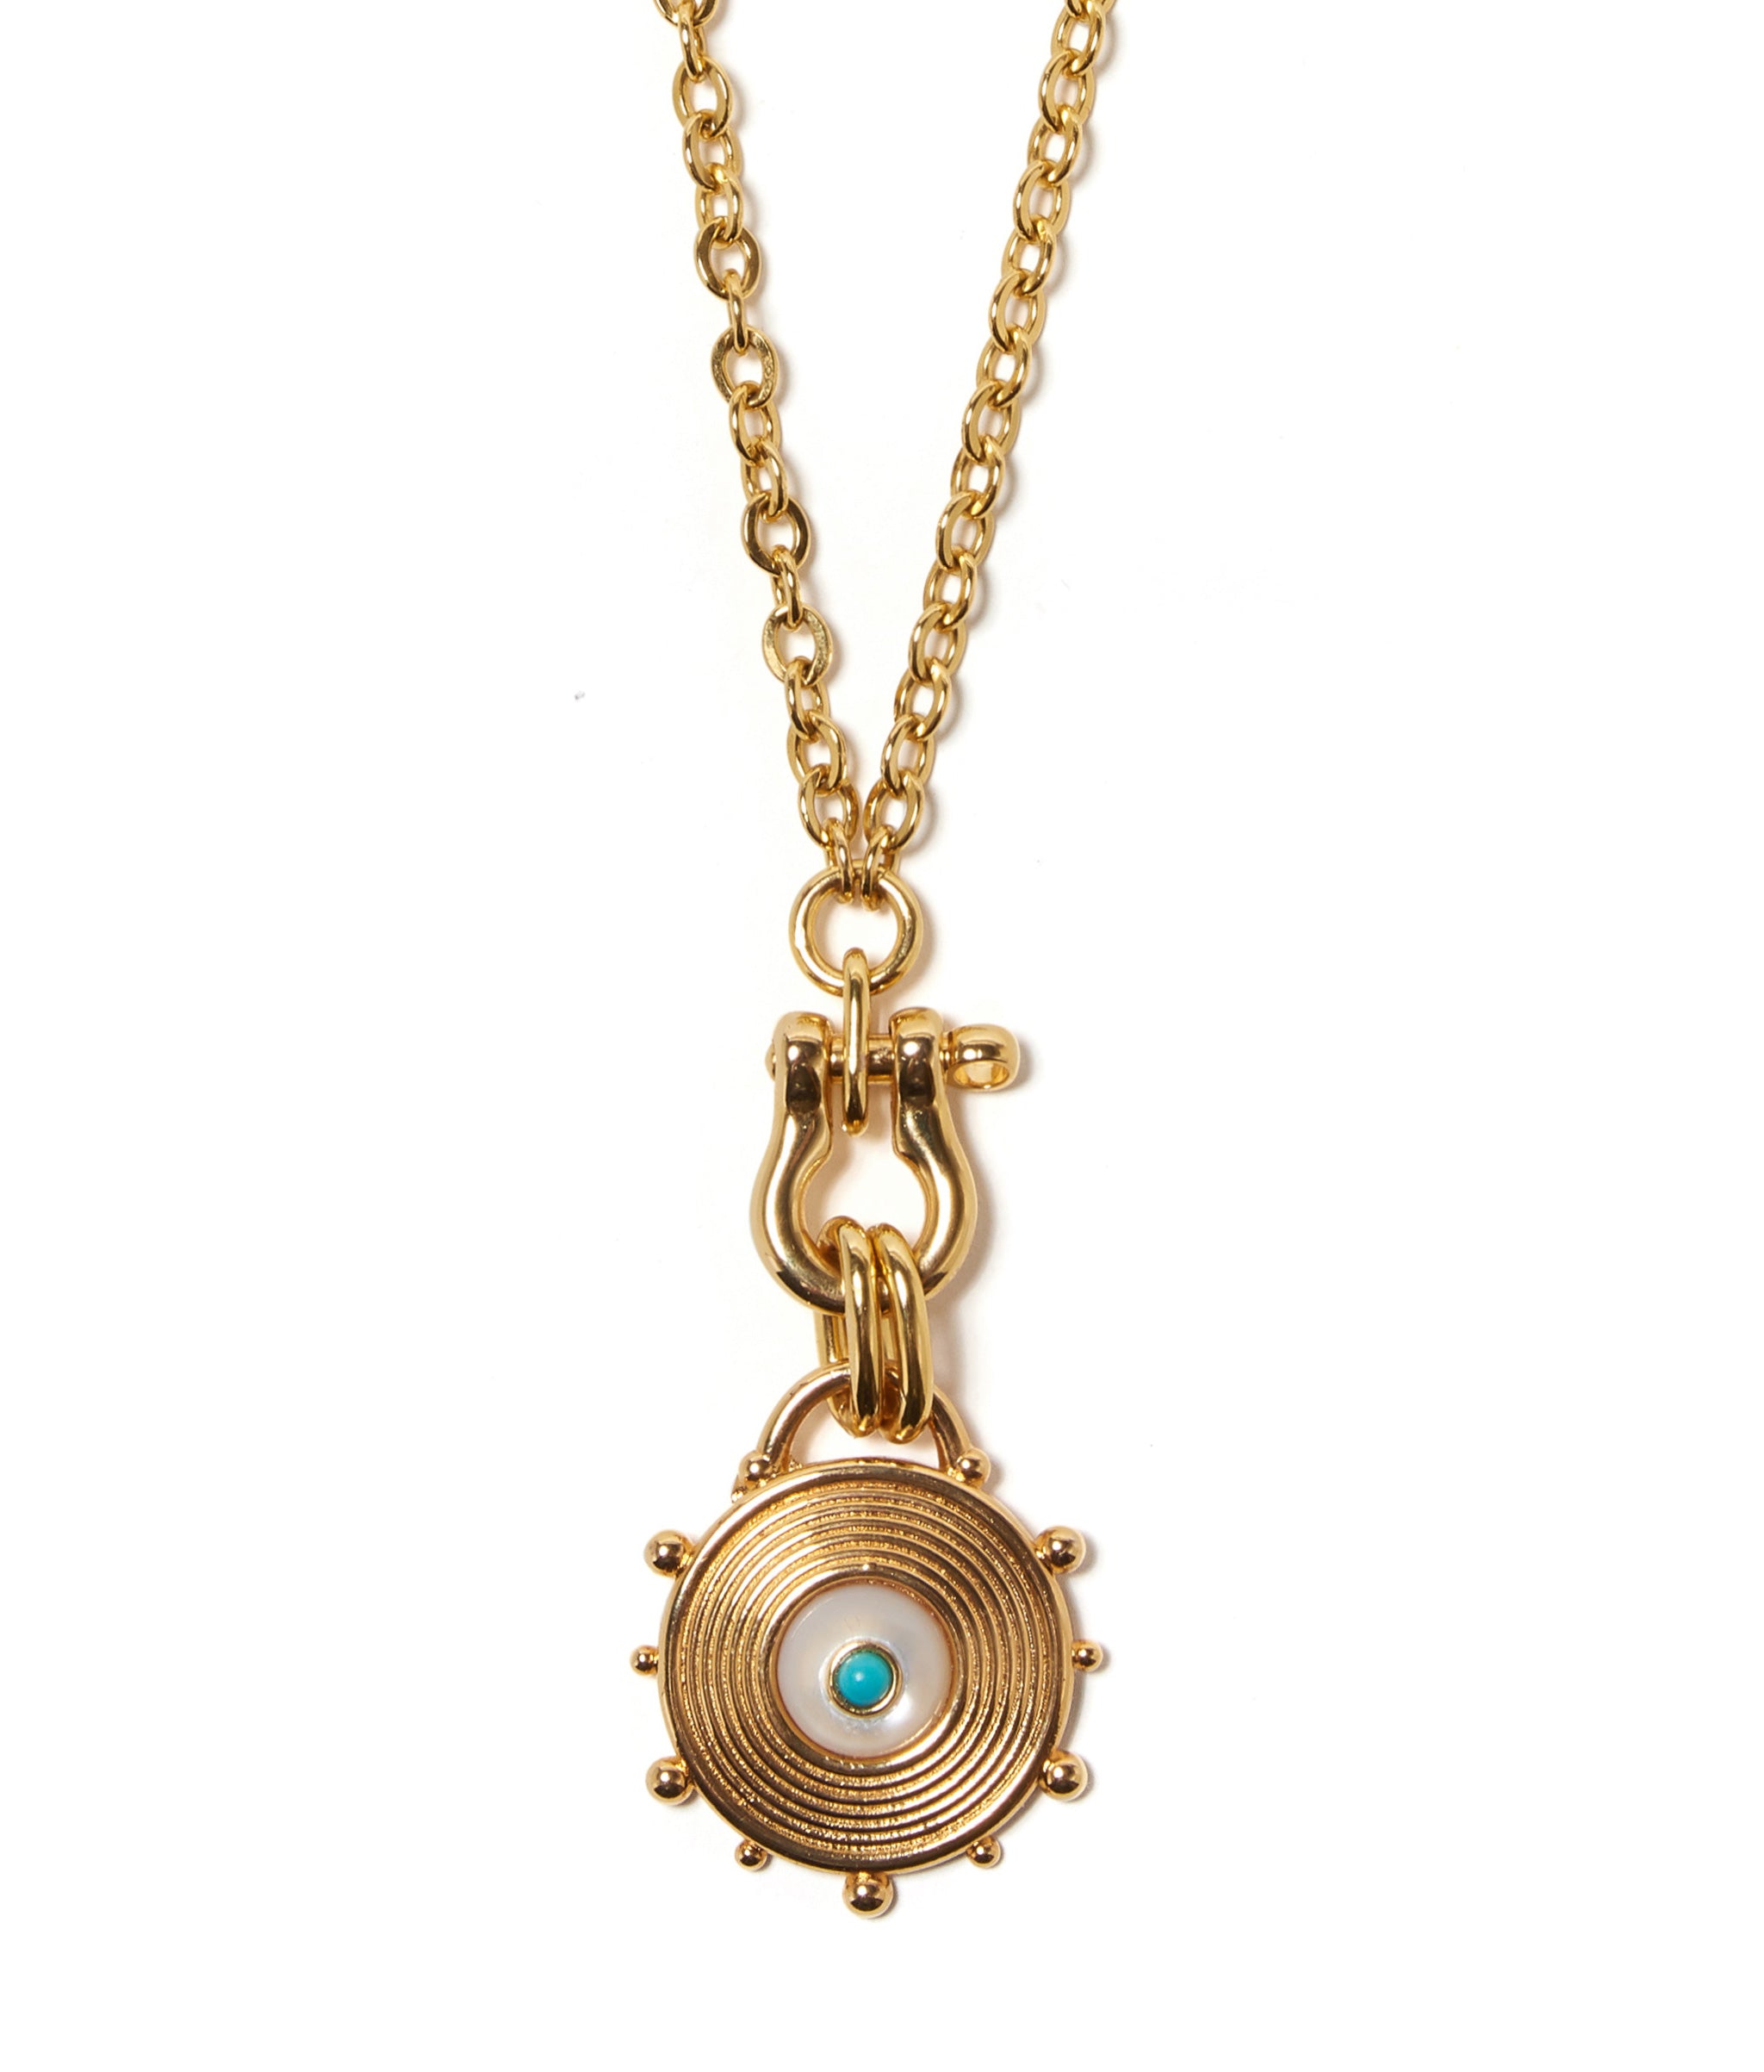 Close-up on gold-plated wheel pendant with mother-of-pearl cabochon and turquoise detail.